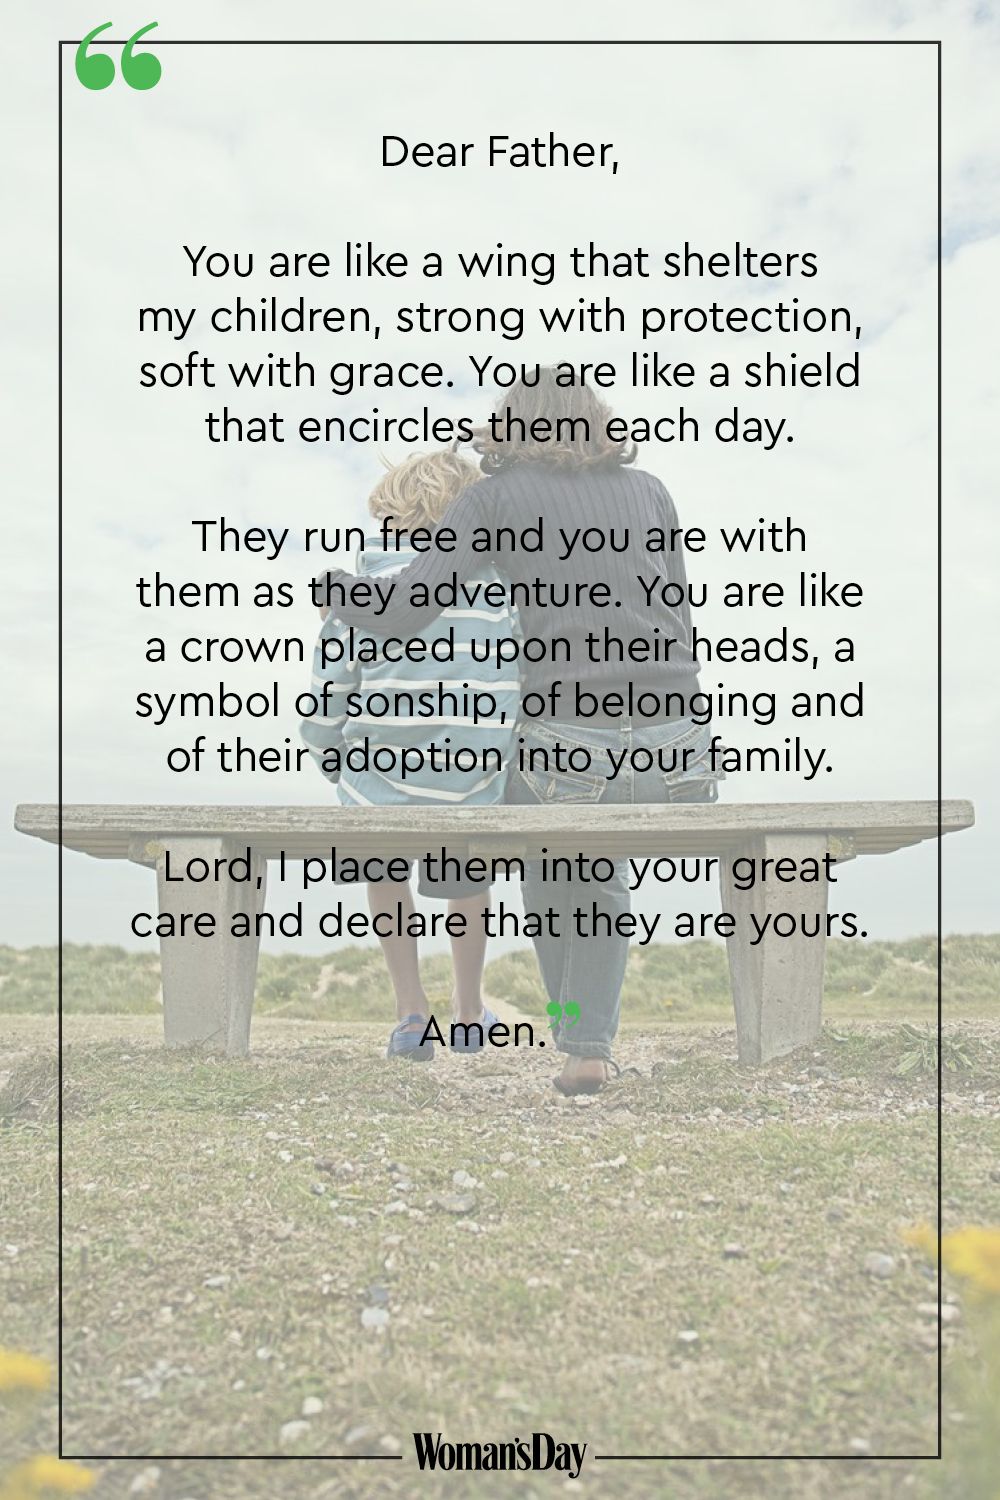 prayer for protection and guidance